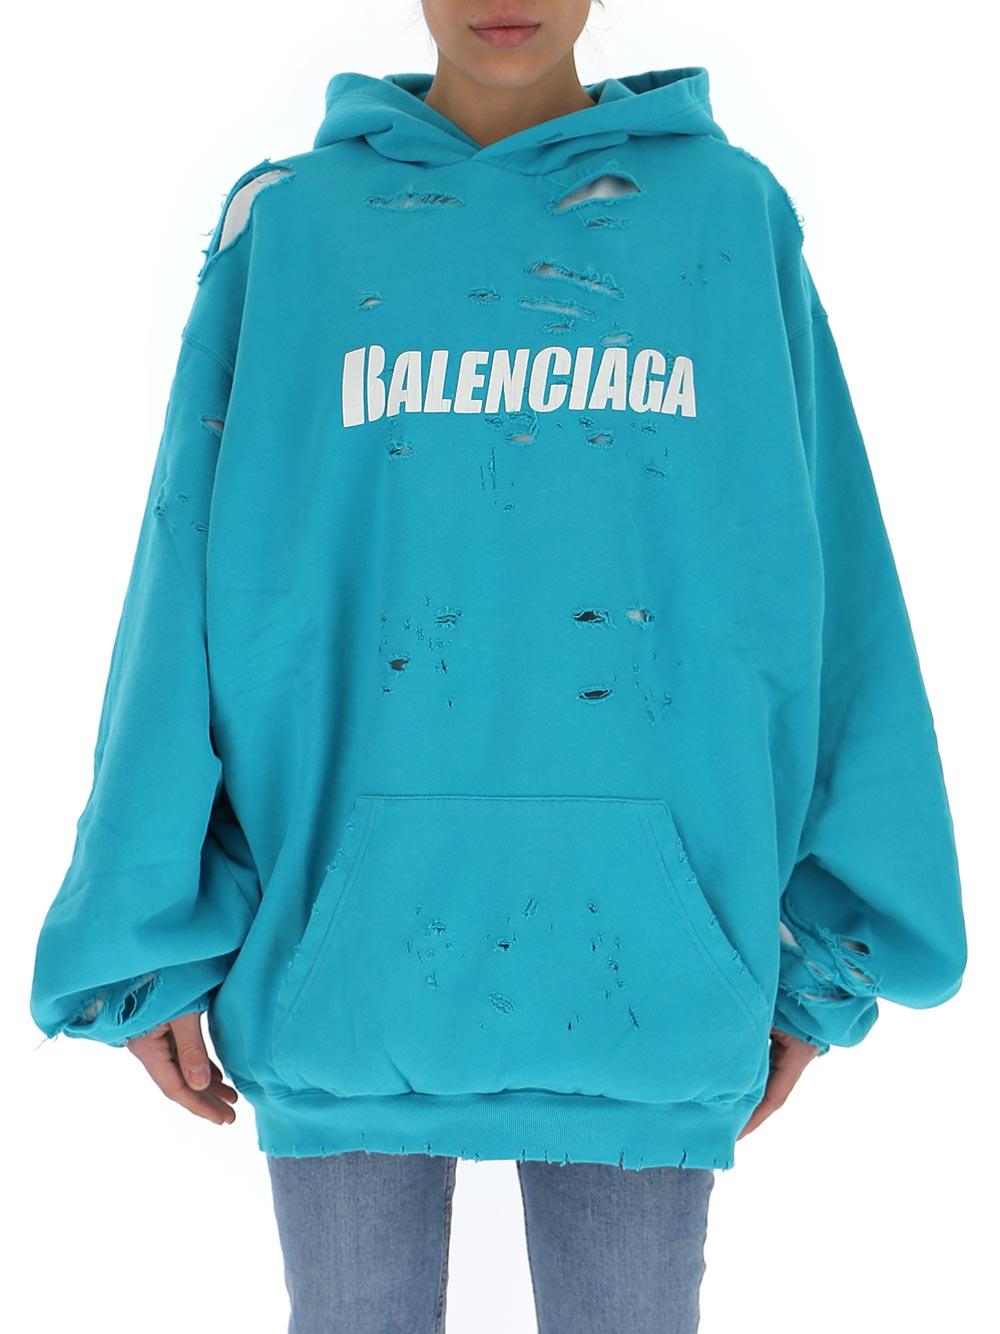 Balenciaga Cotton Caps Destroyed Hoodie in Blue | Lyst